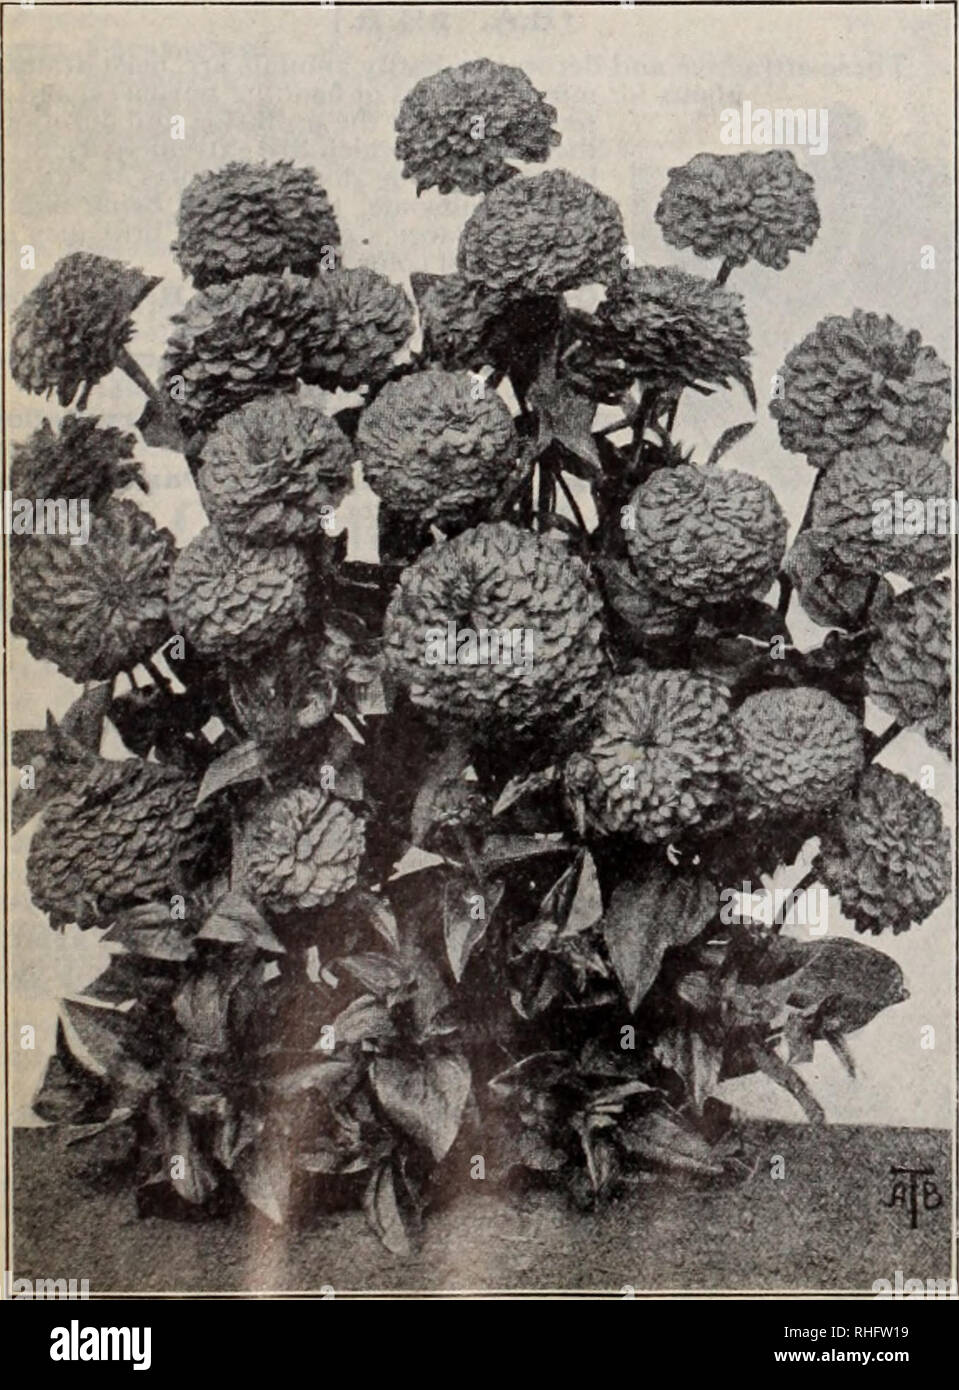 . Boddington's quality bulbs, seeds and plants / Arthur T. Boddington.. Nursery Catalogue. BODDINGTONS ^A^dtttA/ SEEDS 65 Trachelium coeruleum G.S. A free-growing greenhouse annual of easy culture, having large cloud-like heads of clear pale mauve flowers somewhat resembling Gypsophila. Height, i8 in. Pkt. 25 cts., 5 pkts. for $1. TRITOMA {Red-Hot-Poker; Flame Flower). H.P. 4 ft. Pkt. New sorts, mixed. Summer $0 10 TROLLIUS (Globe Flower). H.P. 2 ft. Summer. Caucasicus ( Golden Globe). Yellow 10 Japonicus fl.pl. Double yellow Vsoz., $1.25.. 25 New Hybrids. Mi.xed 10 TOBACCO, see Nicotiana. TOR Stock Photo